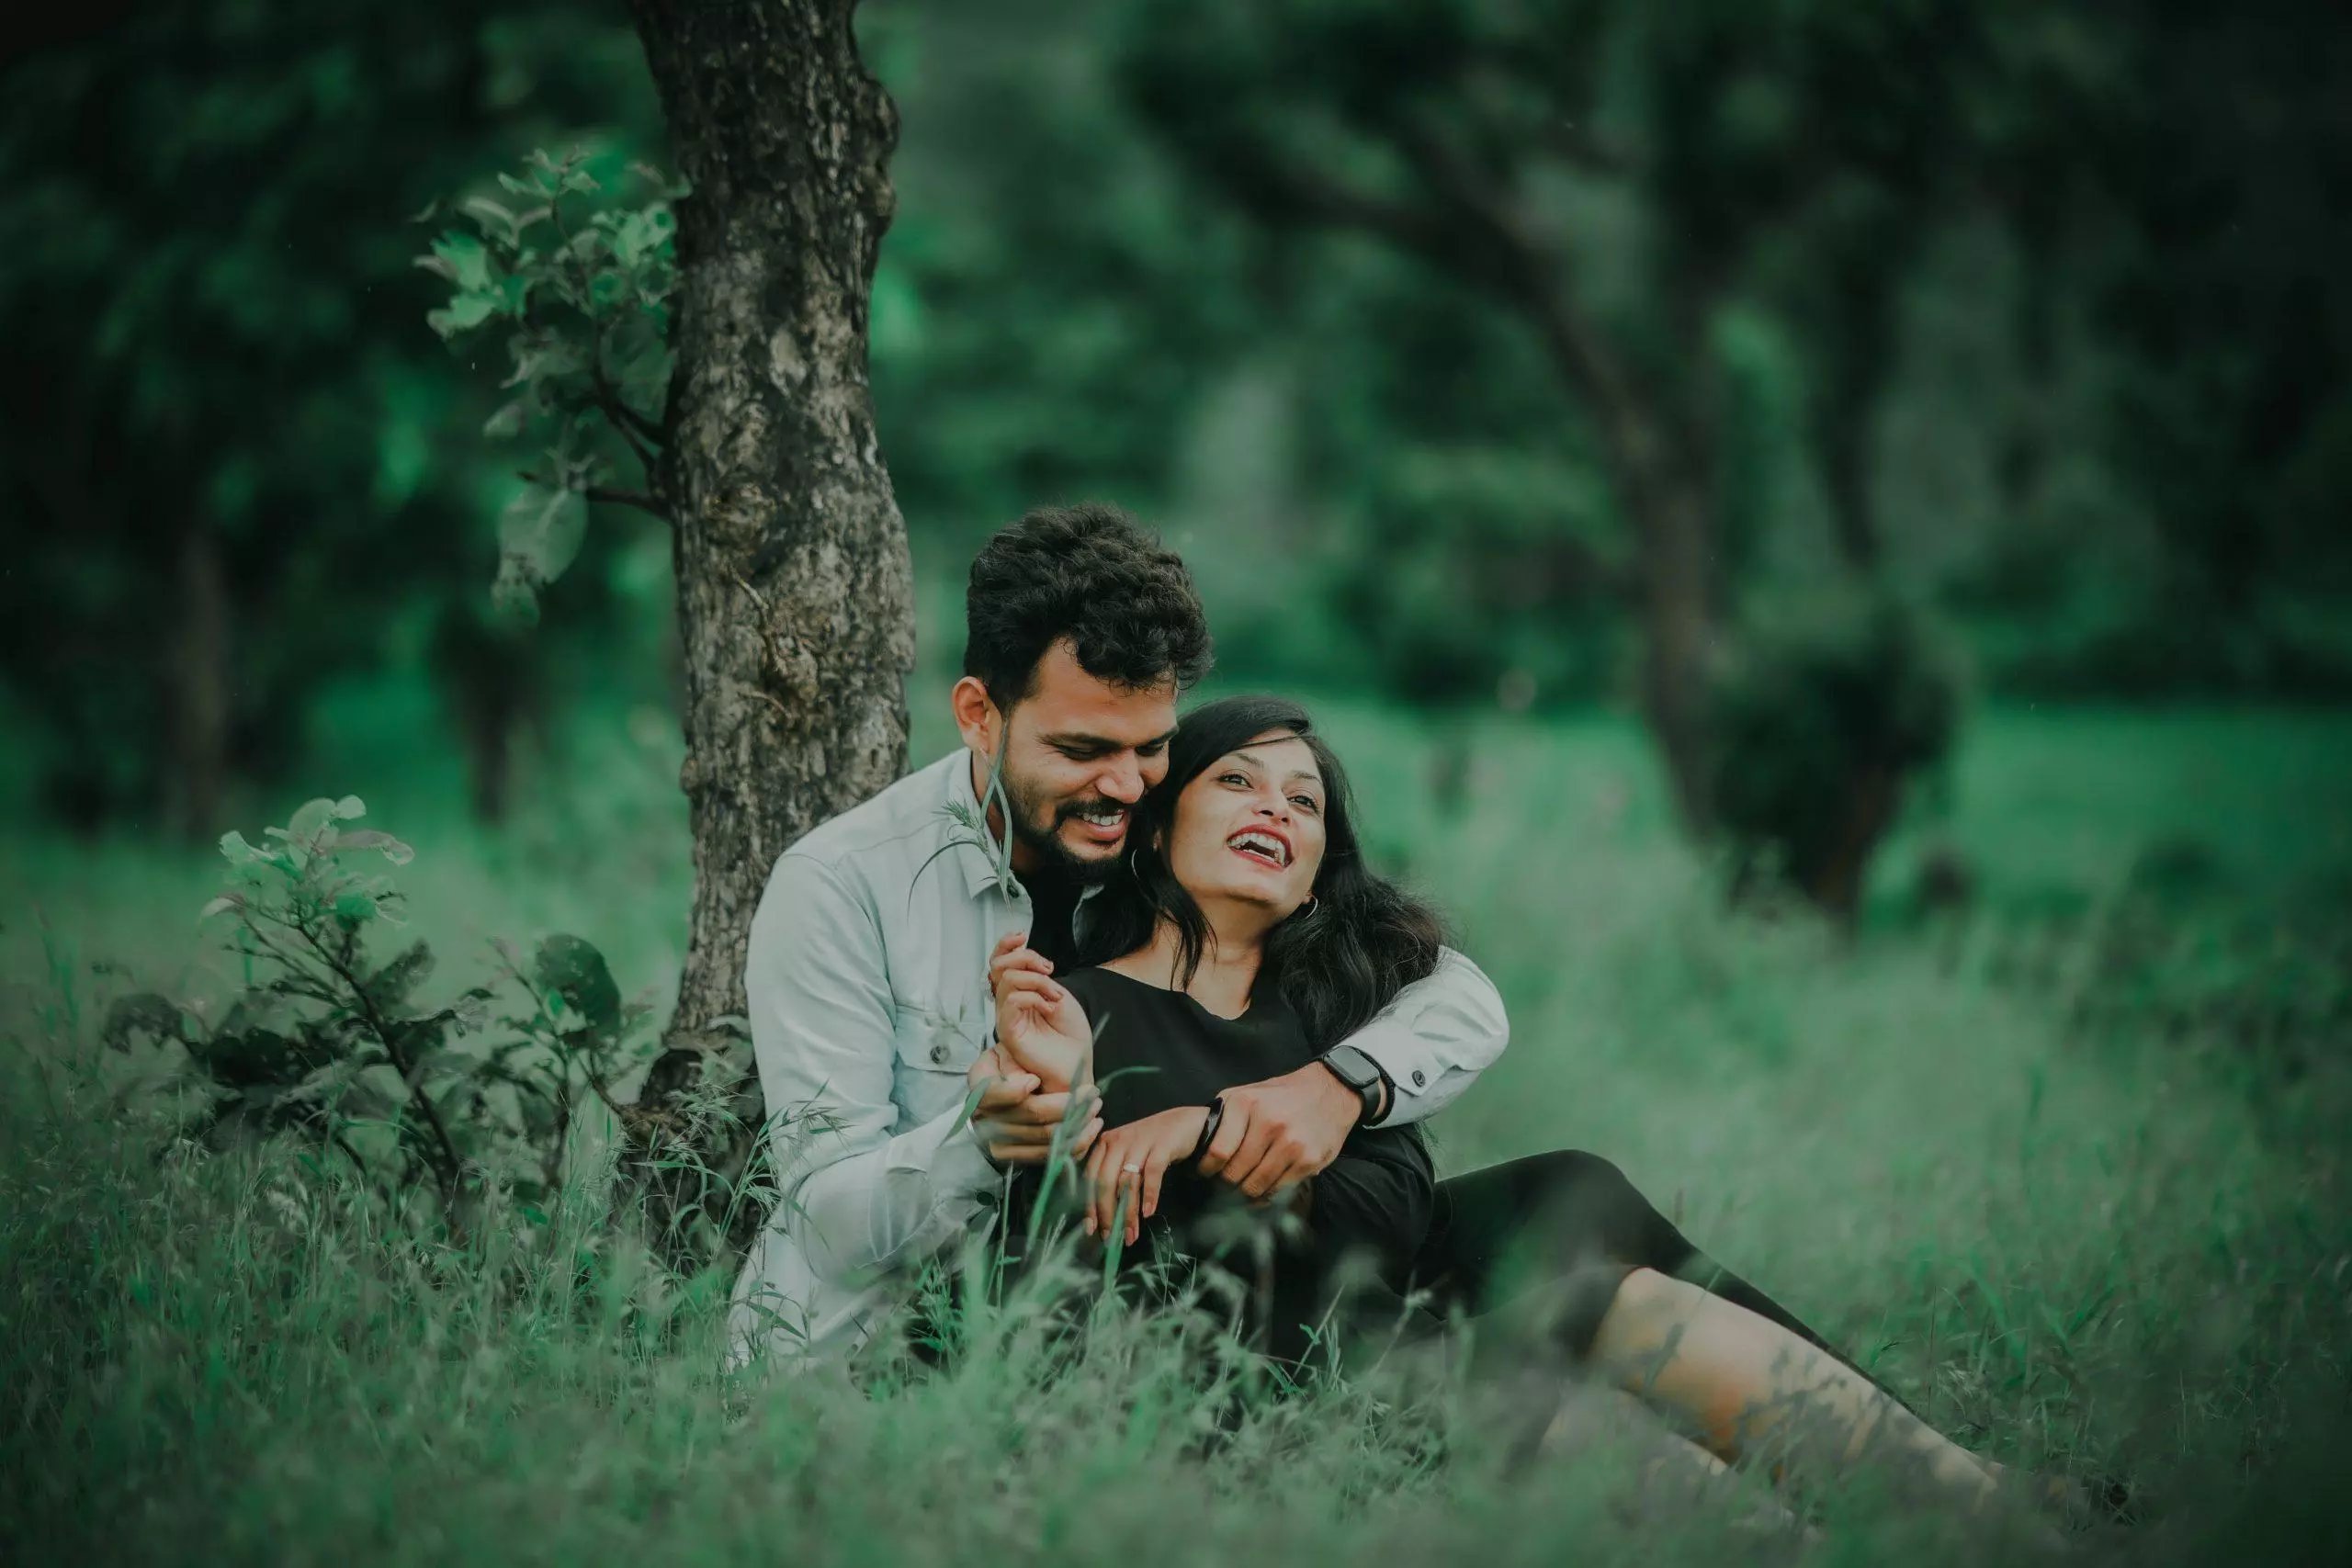 Pre Wedding Photoshoot | Creative Pre Wedding Photoshoot with Unique Poses, Outfits, Ideas, Dresses, and Locations.